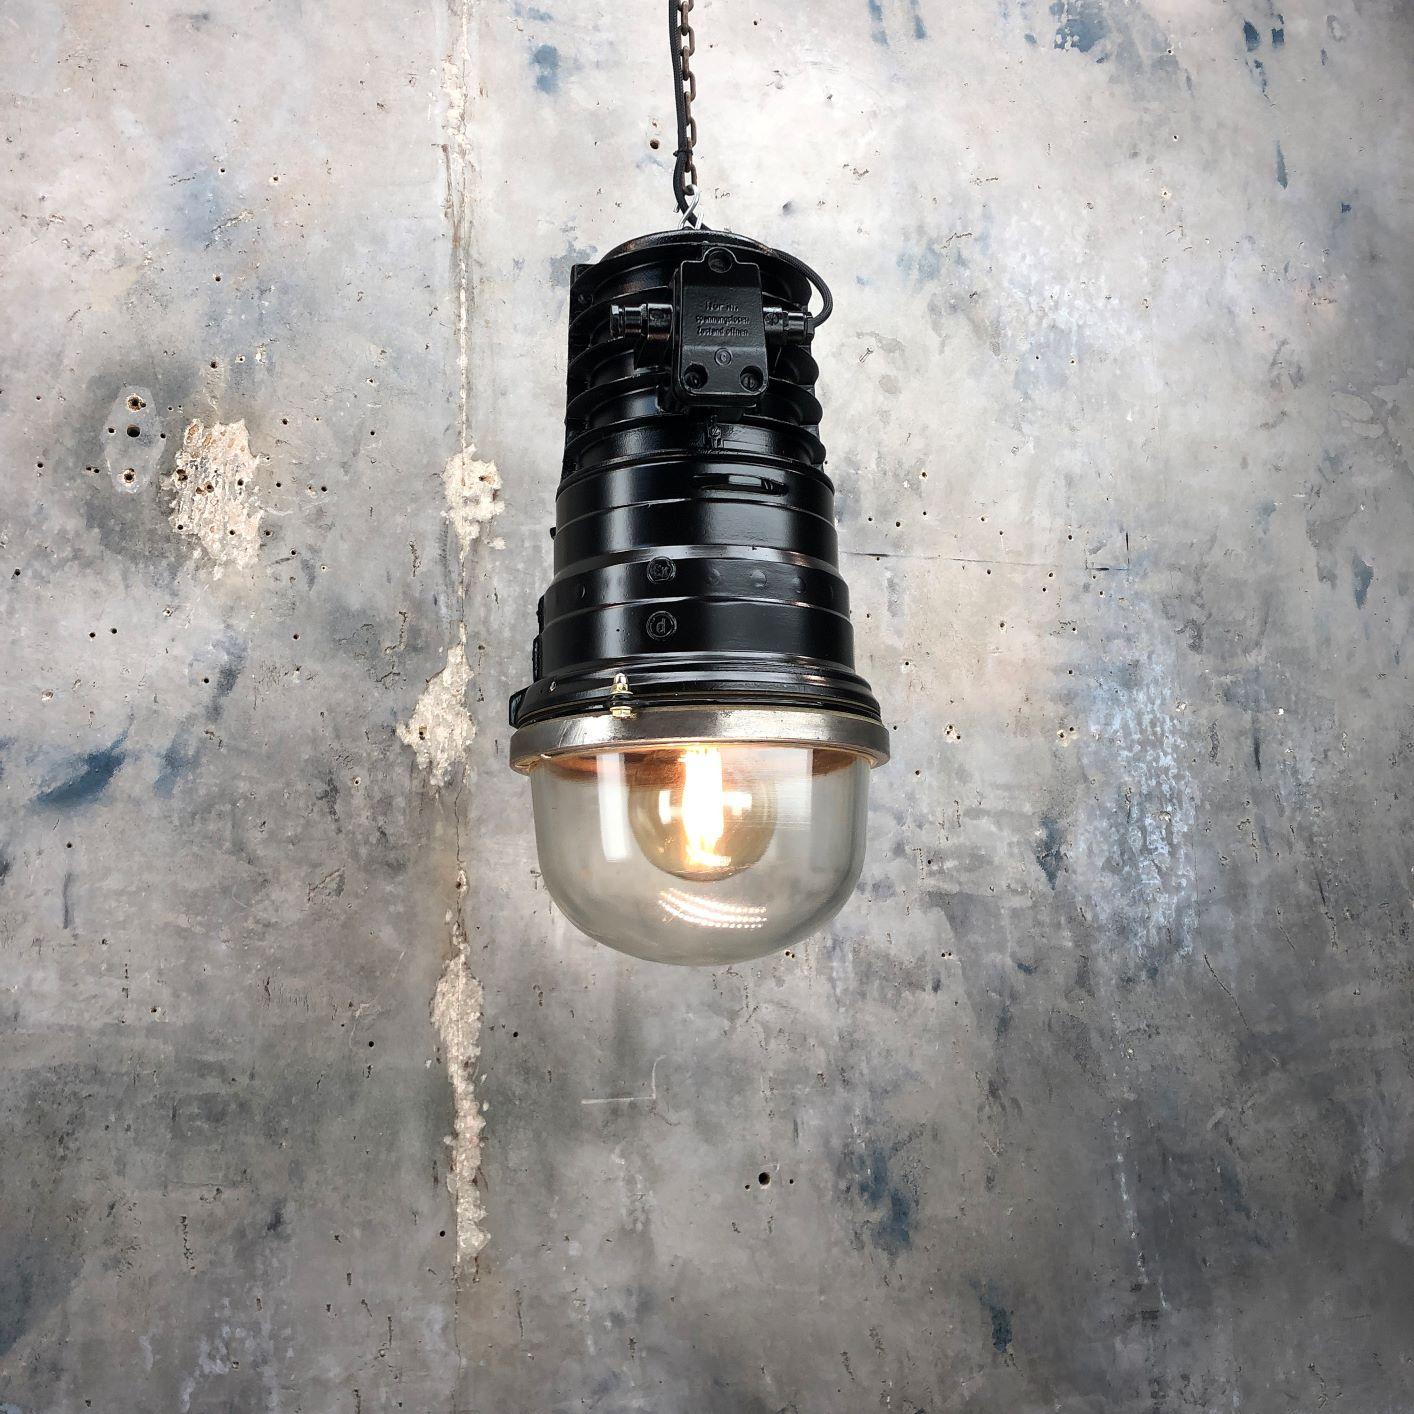 3No. 1970s Vintage Industrial Black Explosion Proof Ceiling Pendant by EOW  For Sale 4